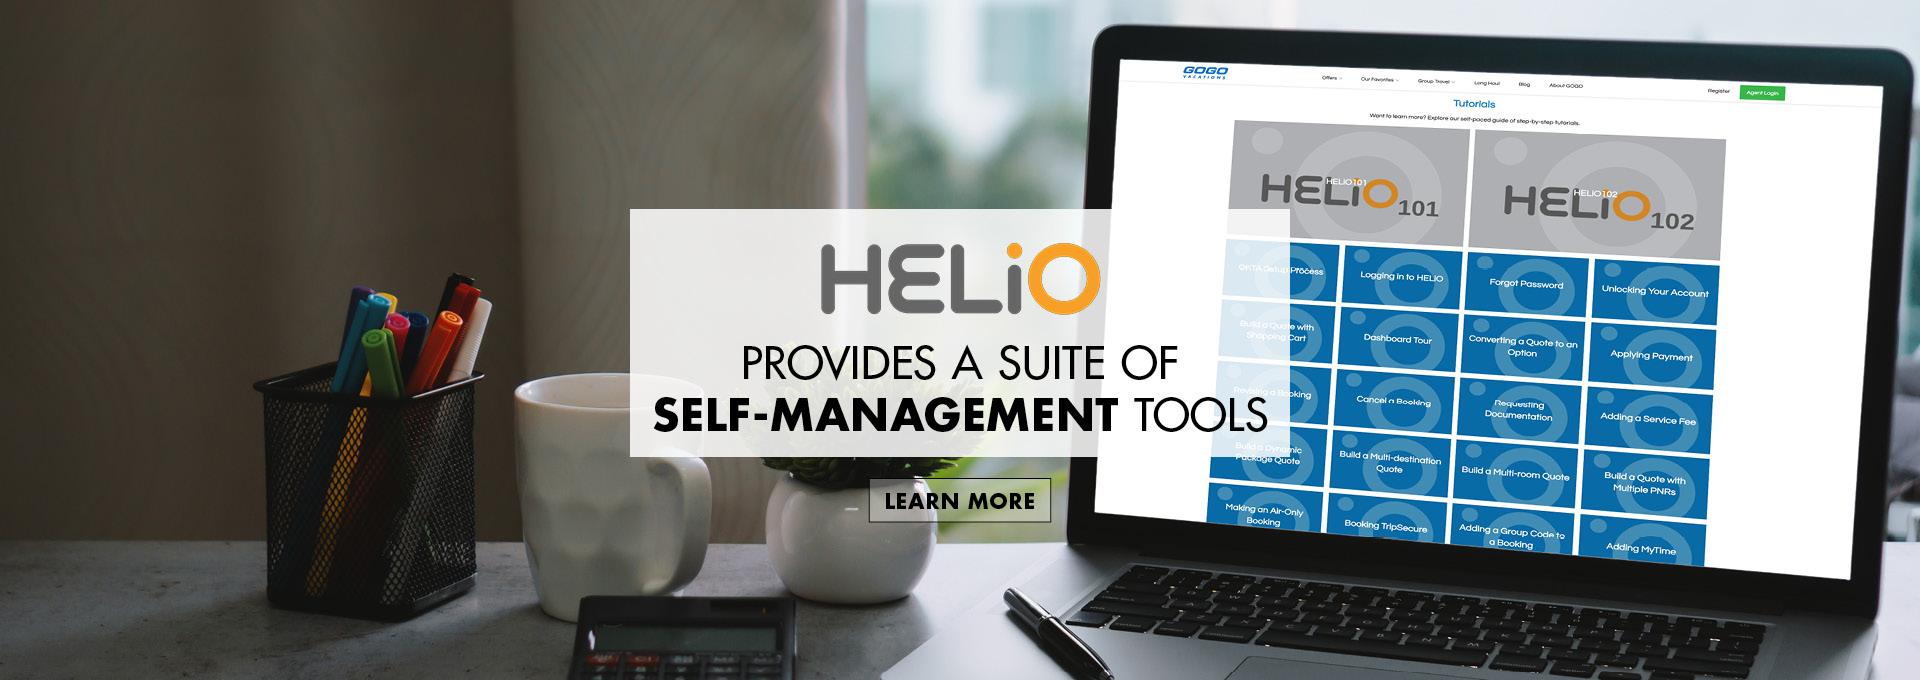 HELiO provides a suite of self-management tools